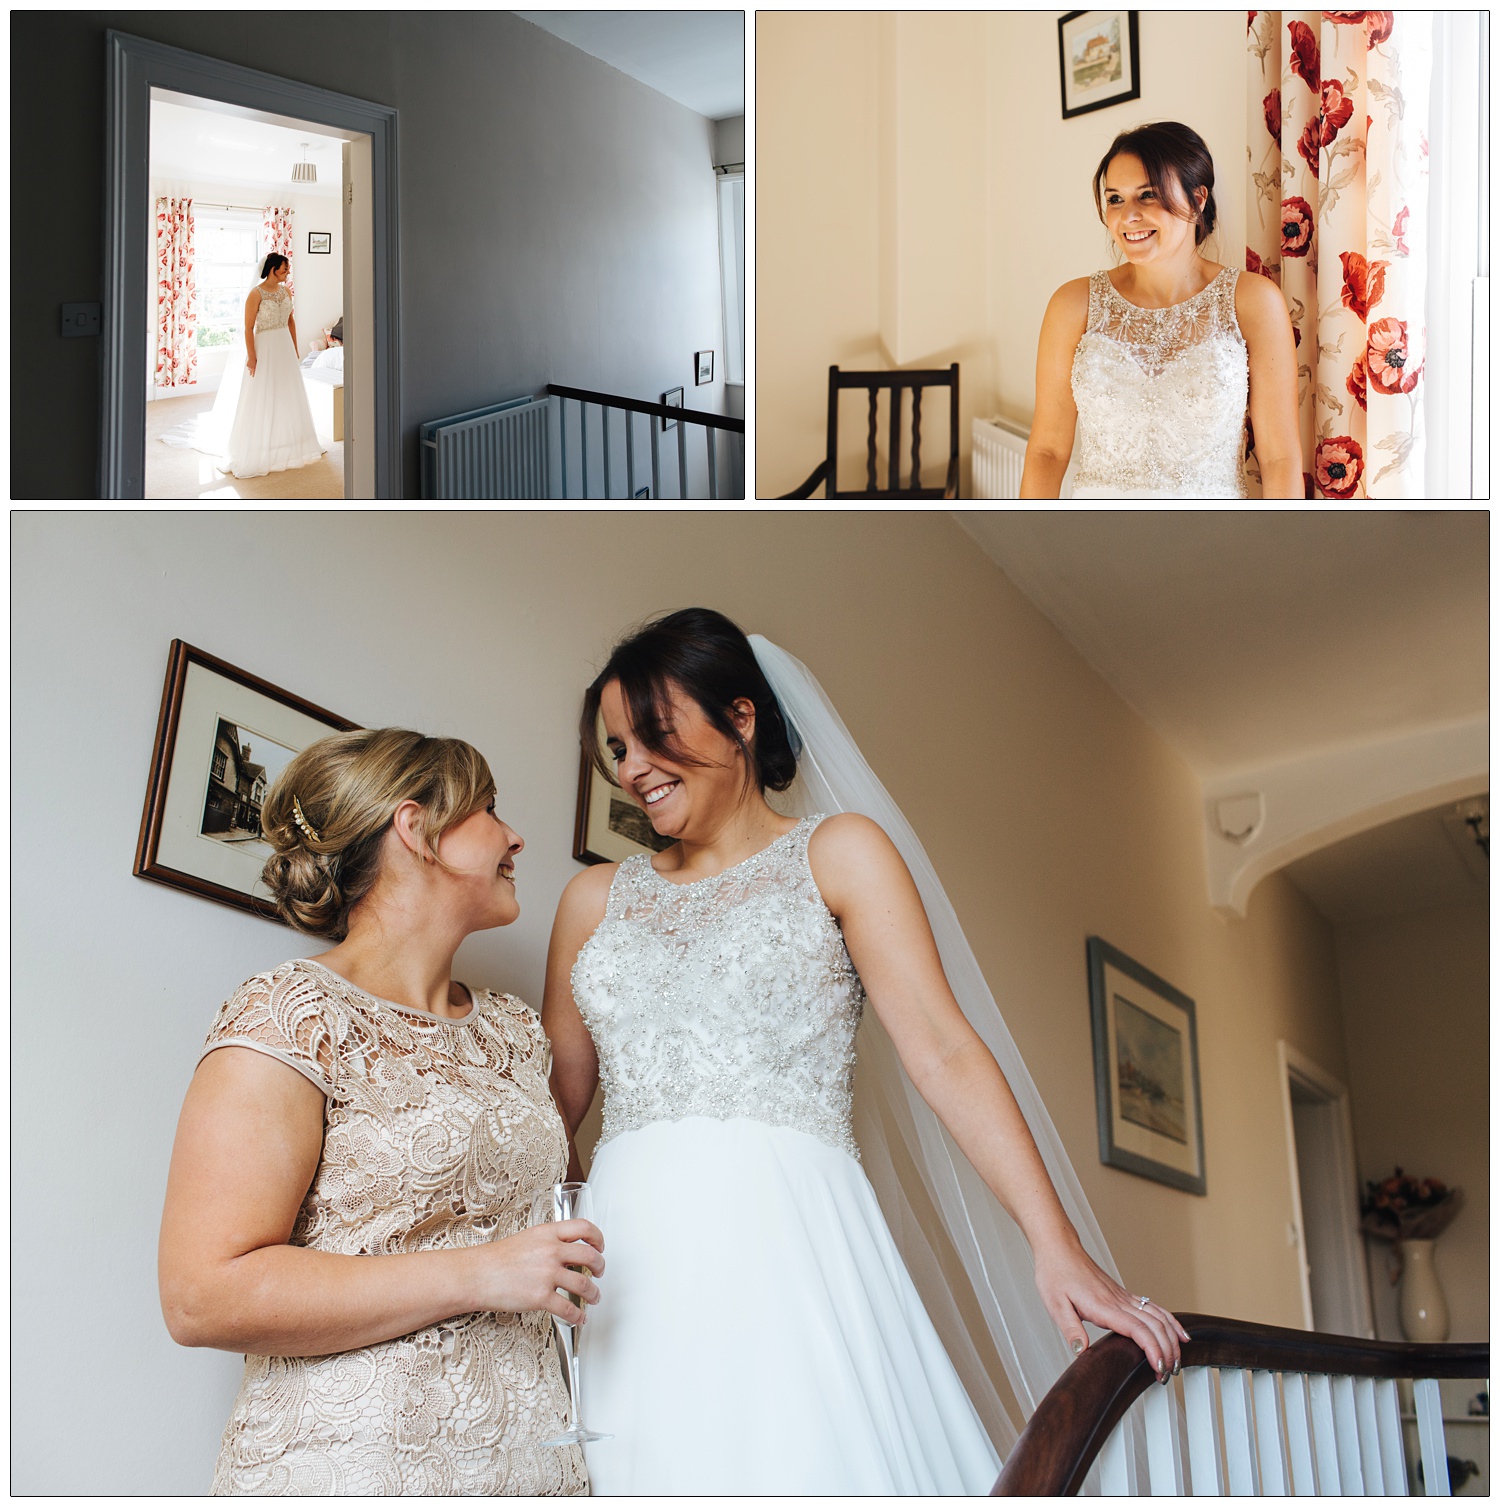 Sisters smiling at each other on the stairs. One is in her wedding dress, the other in a bridesmaid dress.